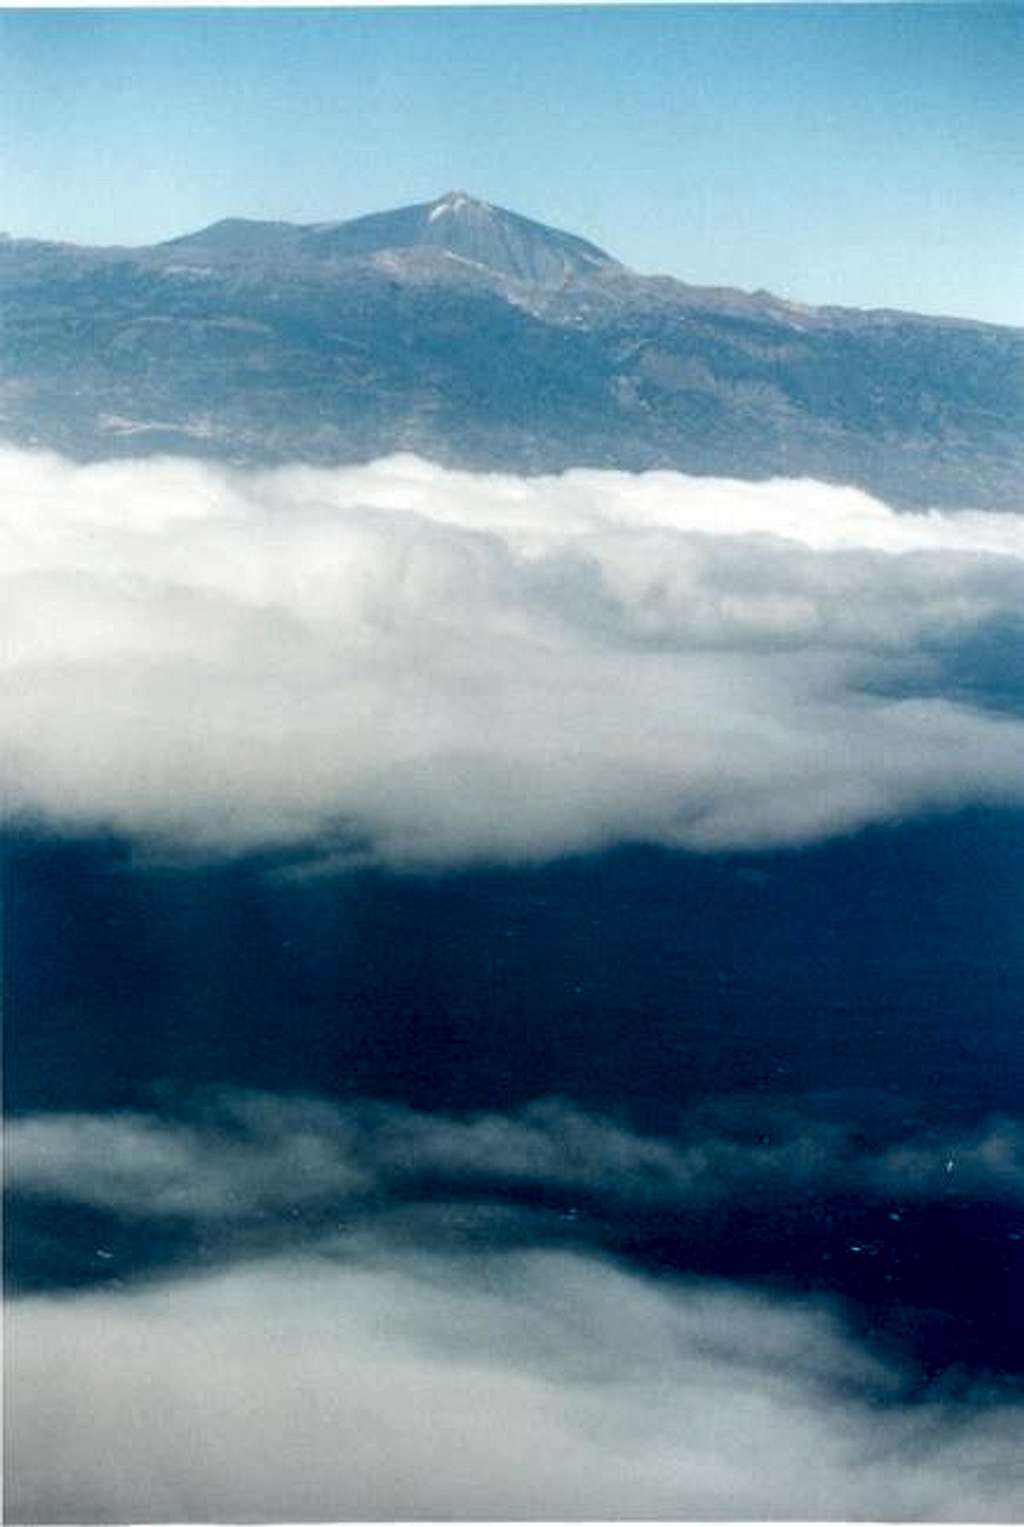 The Teide, clouds and the sea...